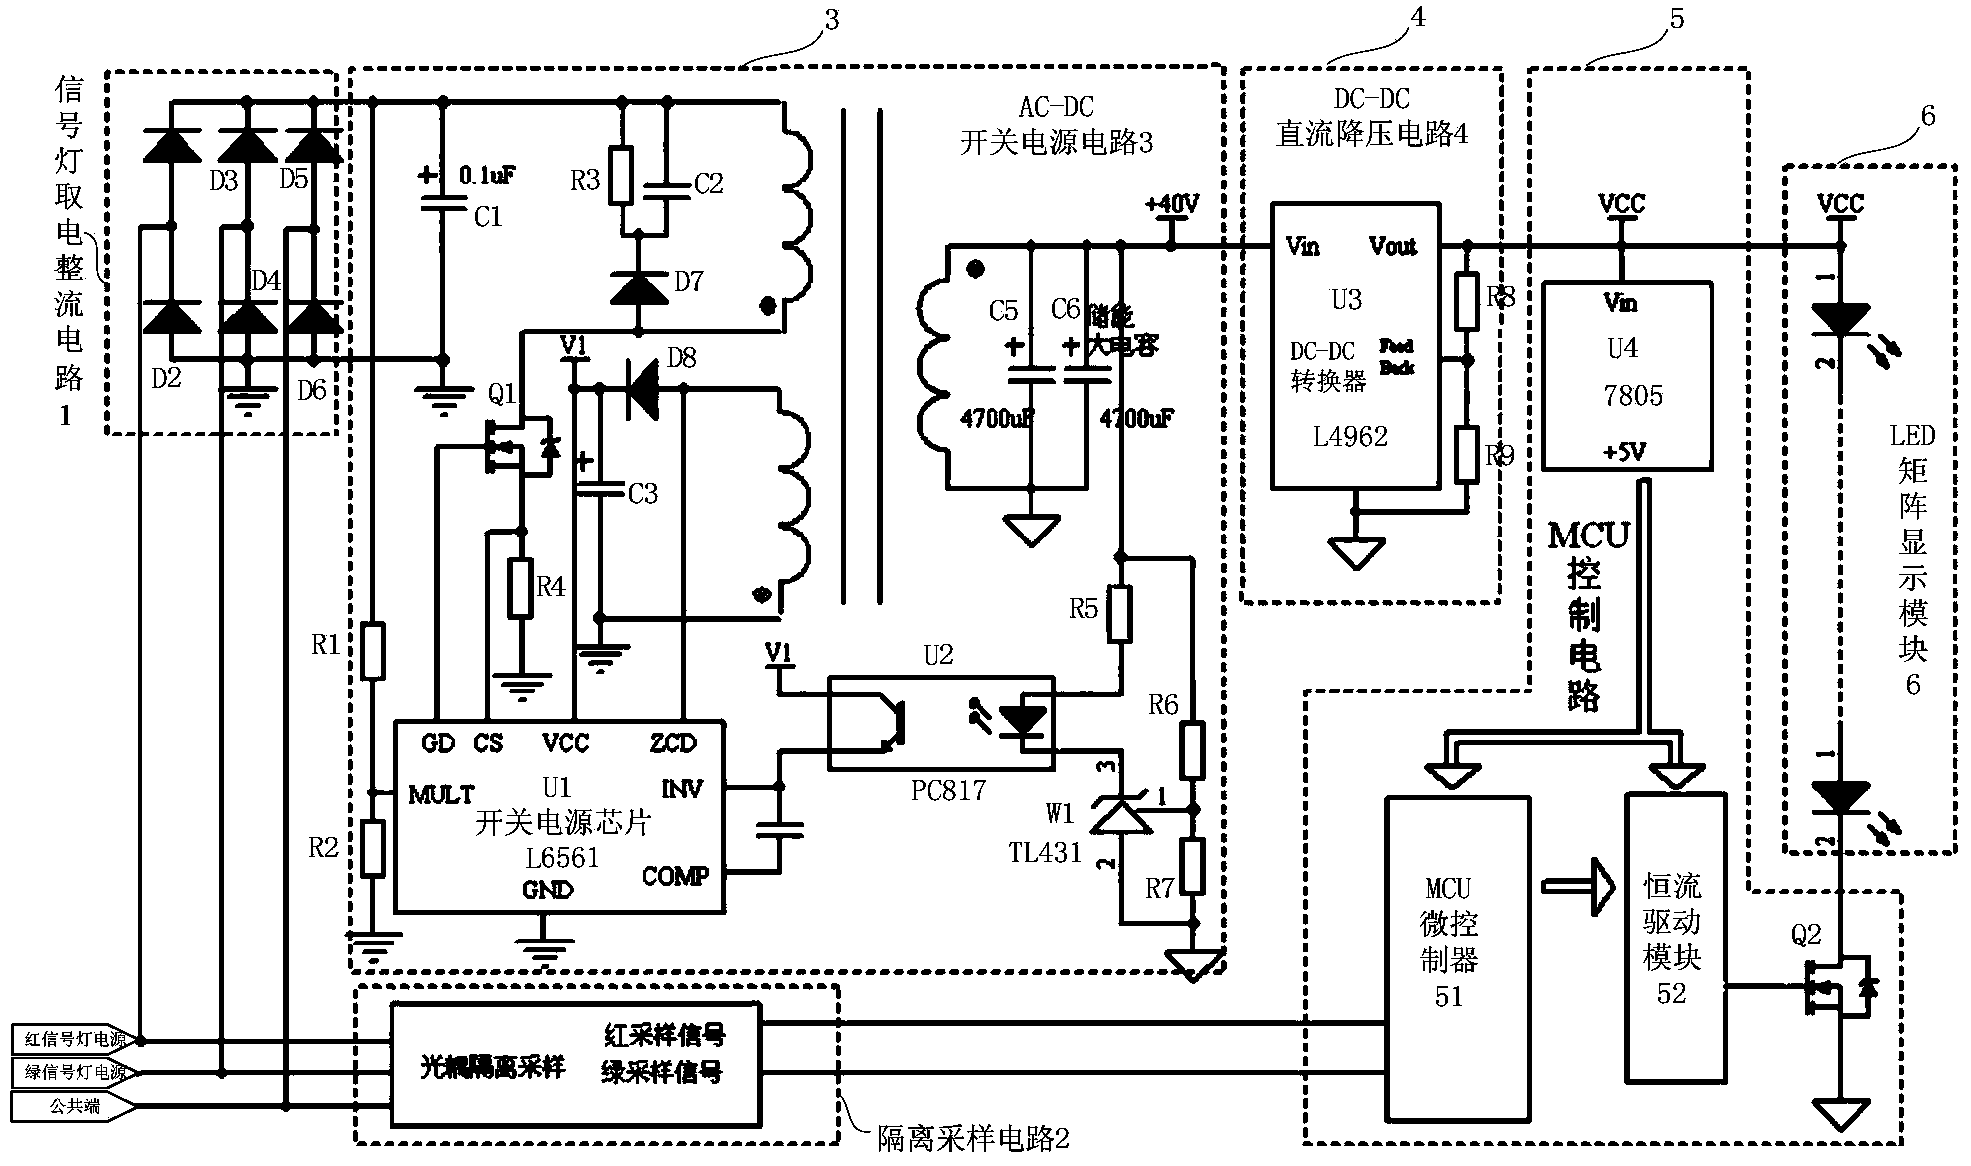 Low-impact-current high-power-factor energy storage type countdown display circuit